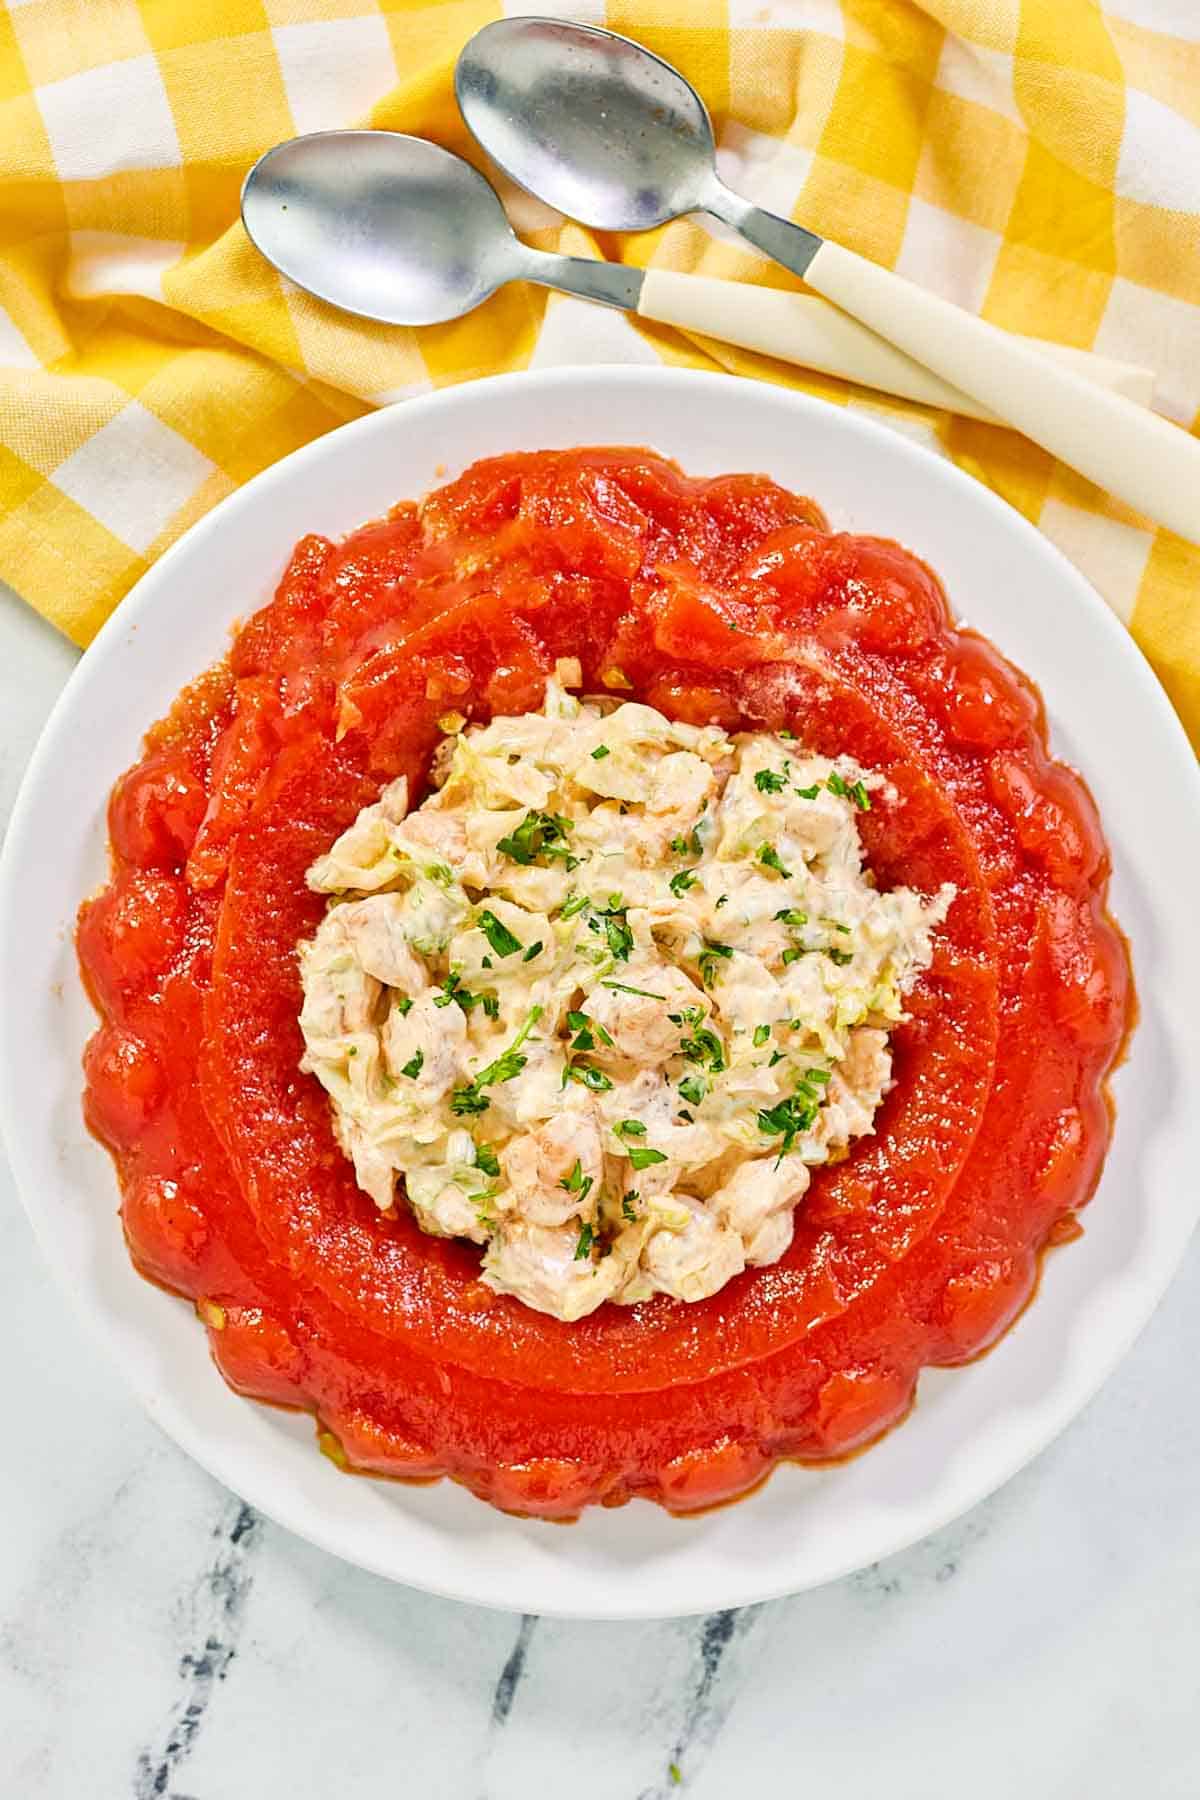 Tomato aspic made in a round jello ring mold with shrimp salad in the center.